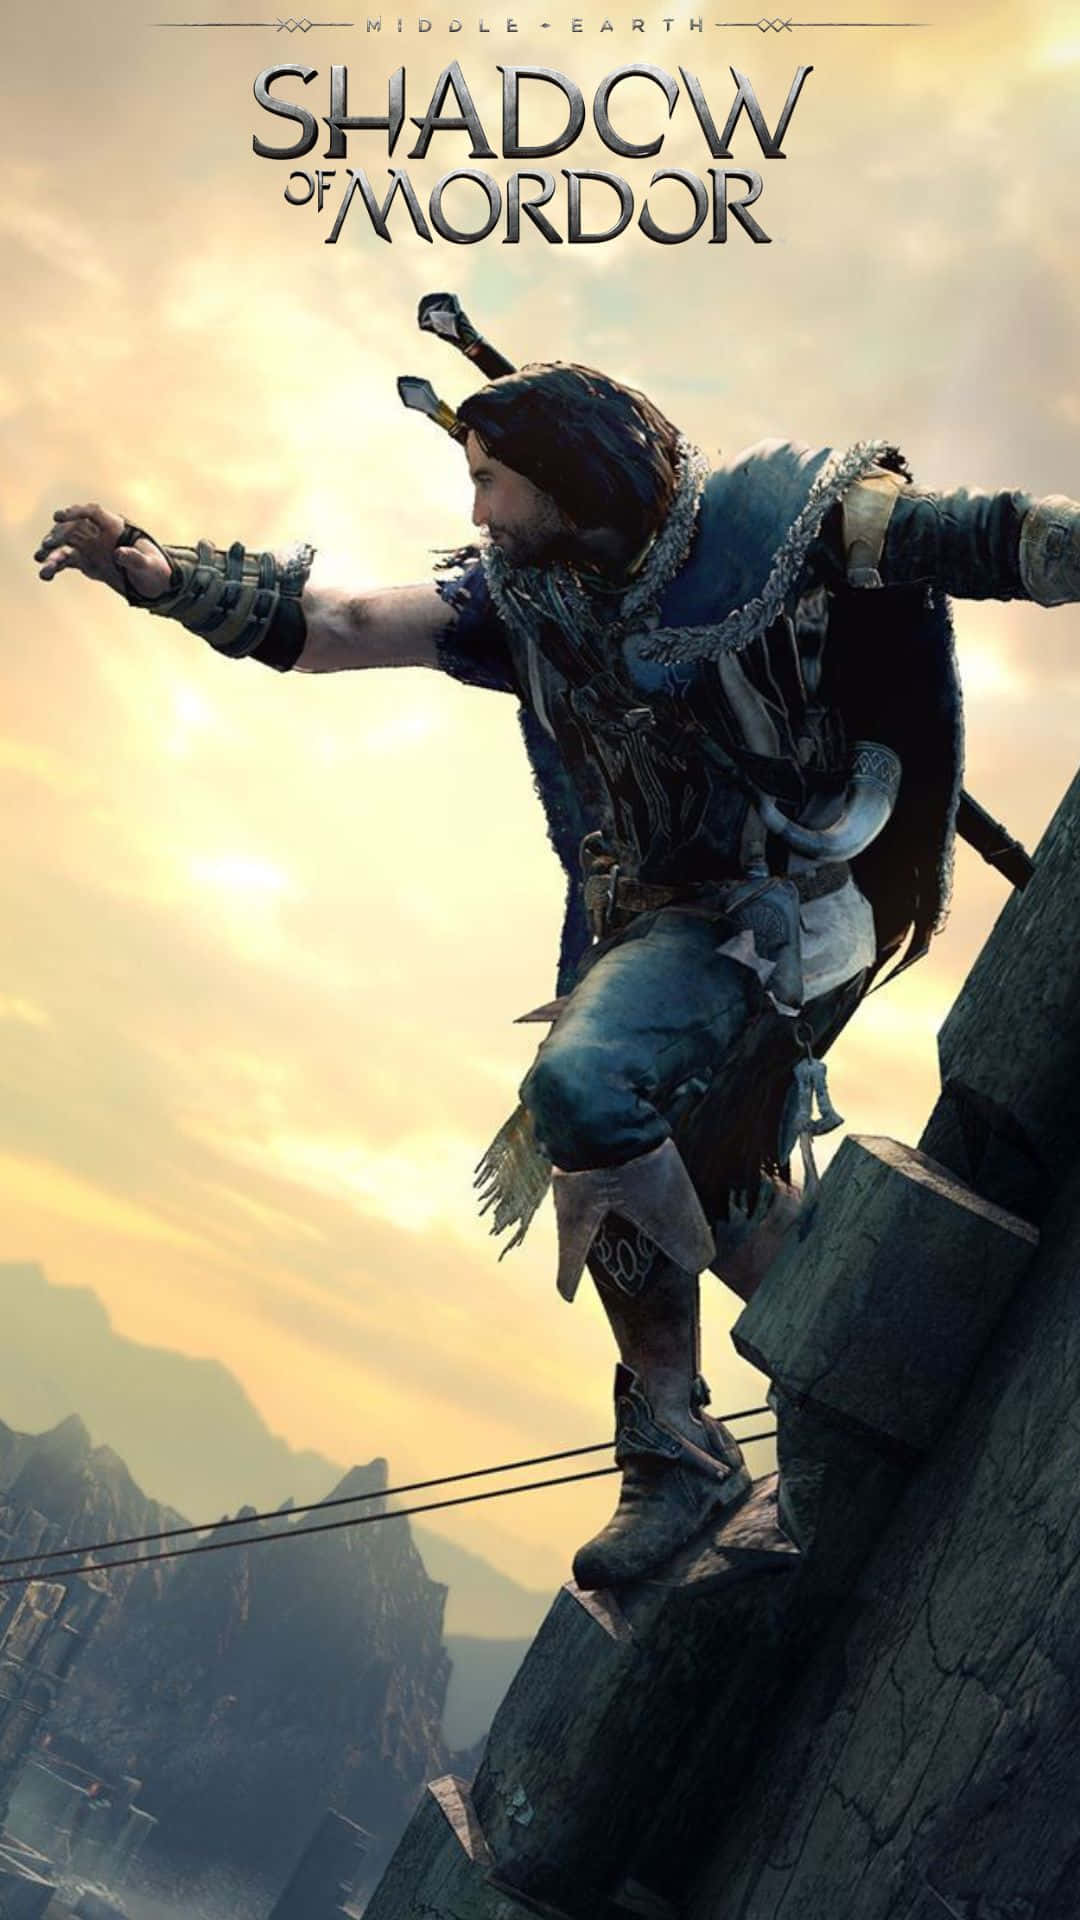 Unlock the Tower of Sauron and Reclaim Mordor with Android Shadow Of Mordor